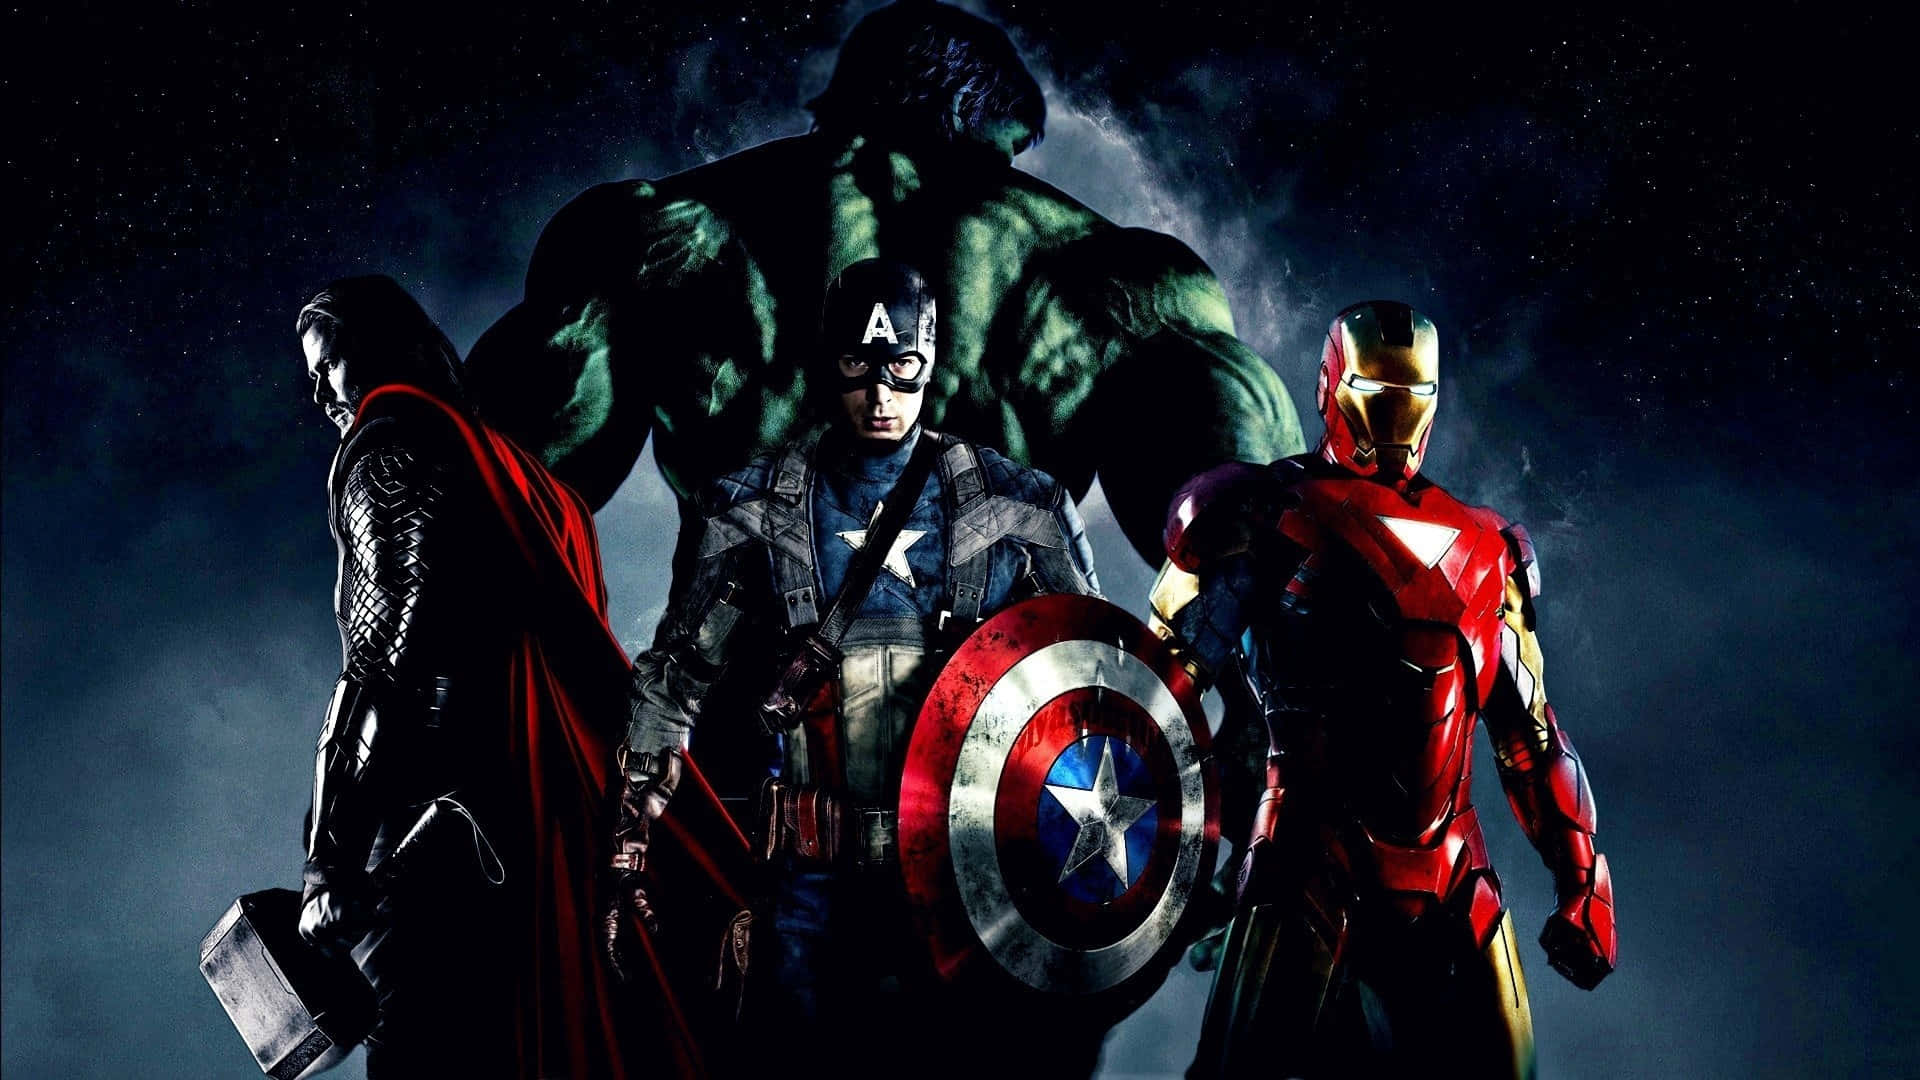 Assemble your favorite Avengers and join the fight! Wallpaper